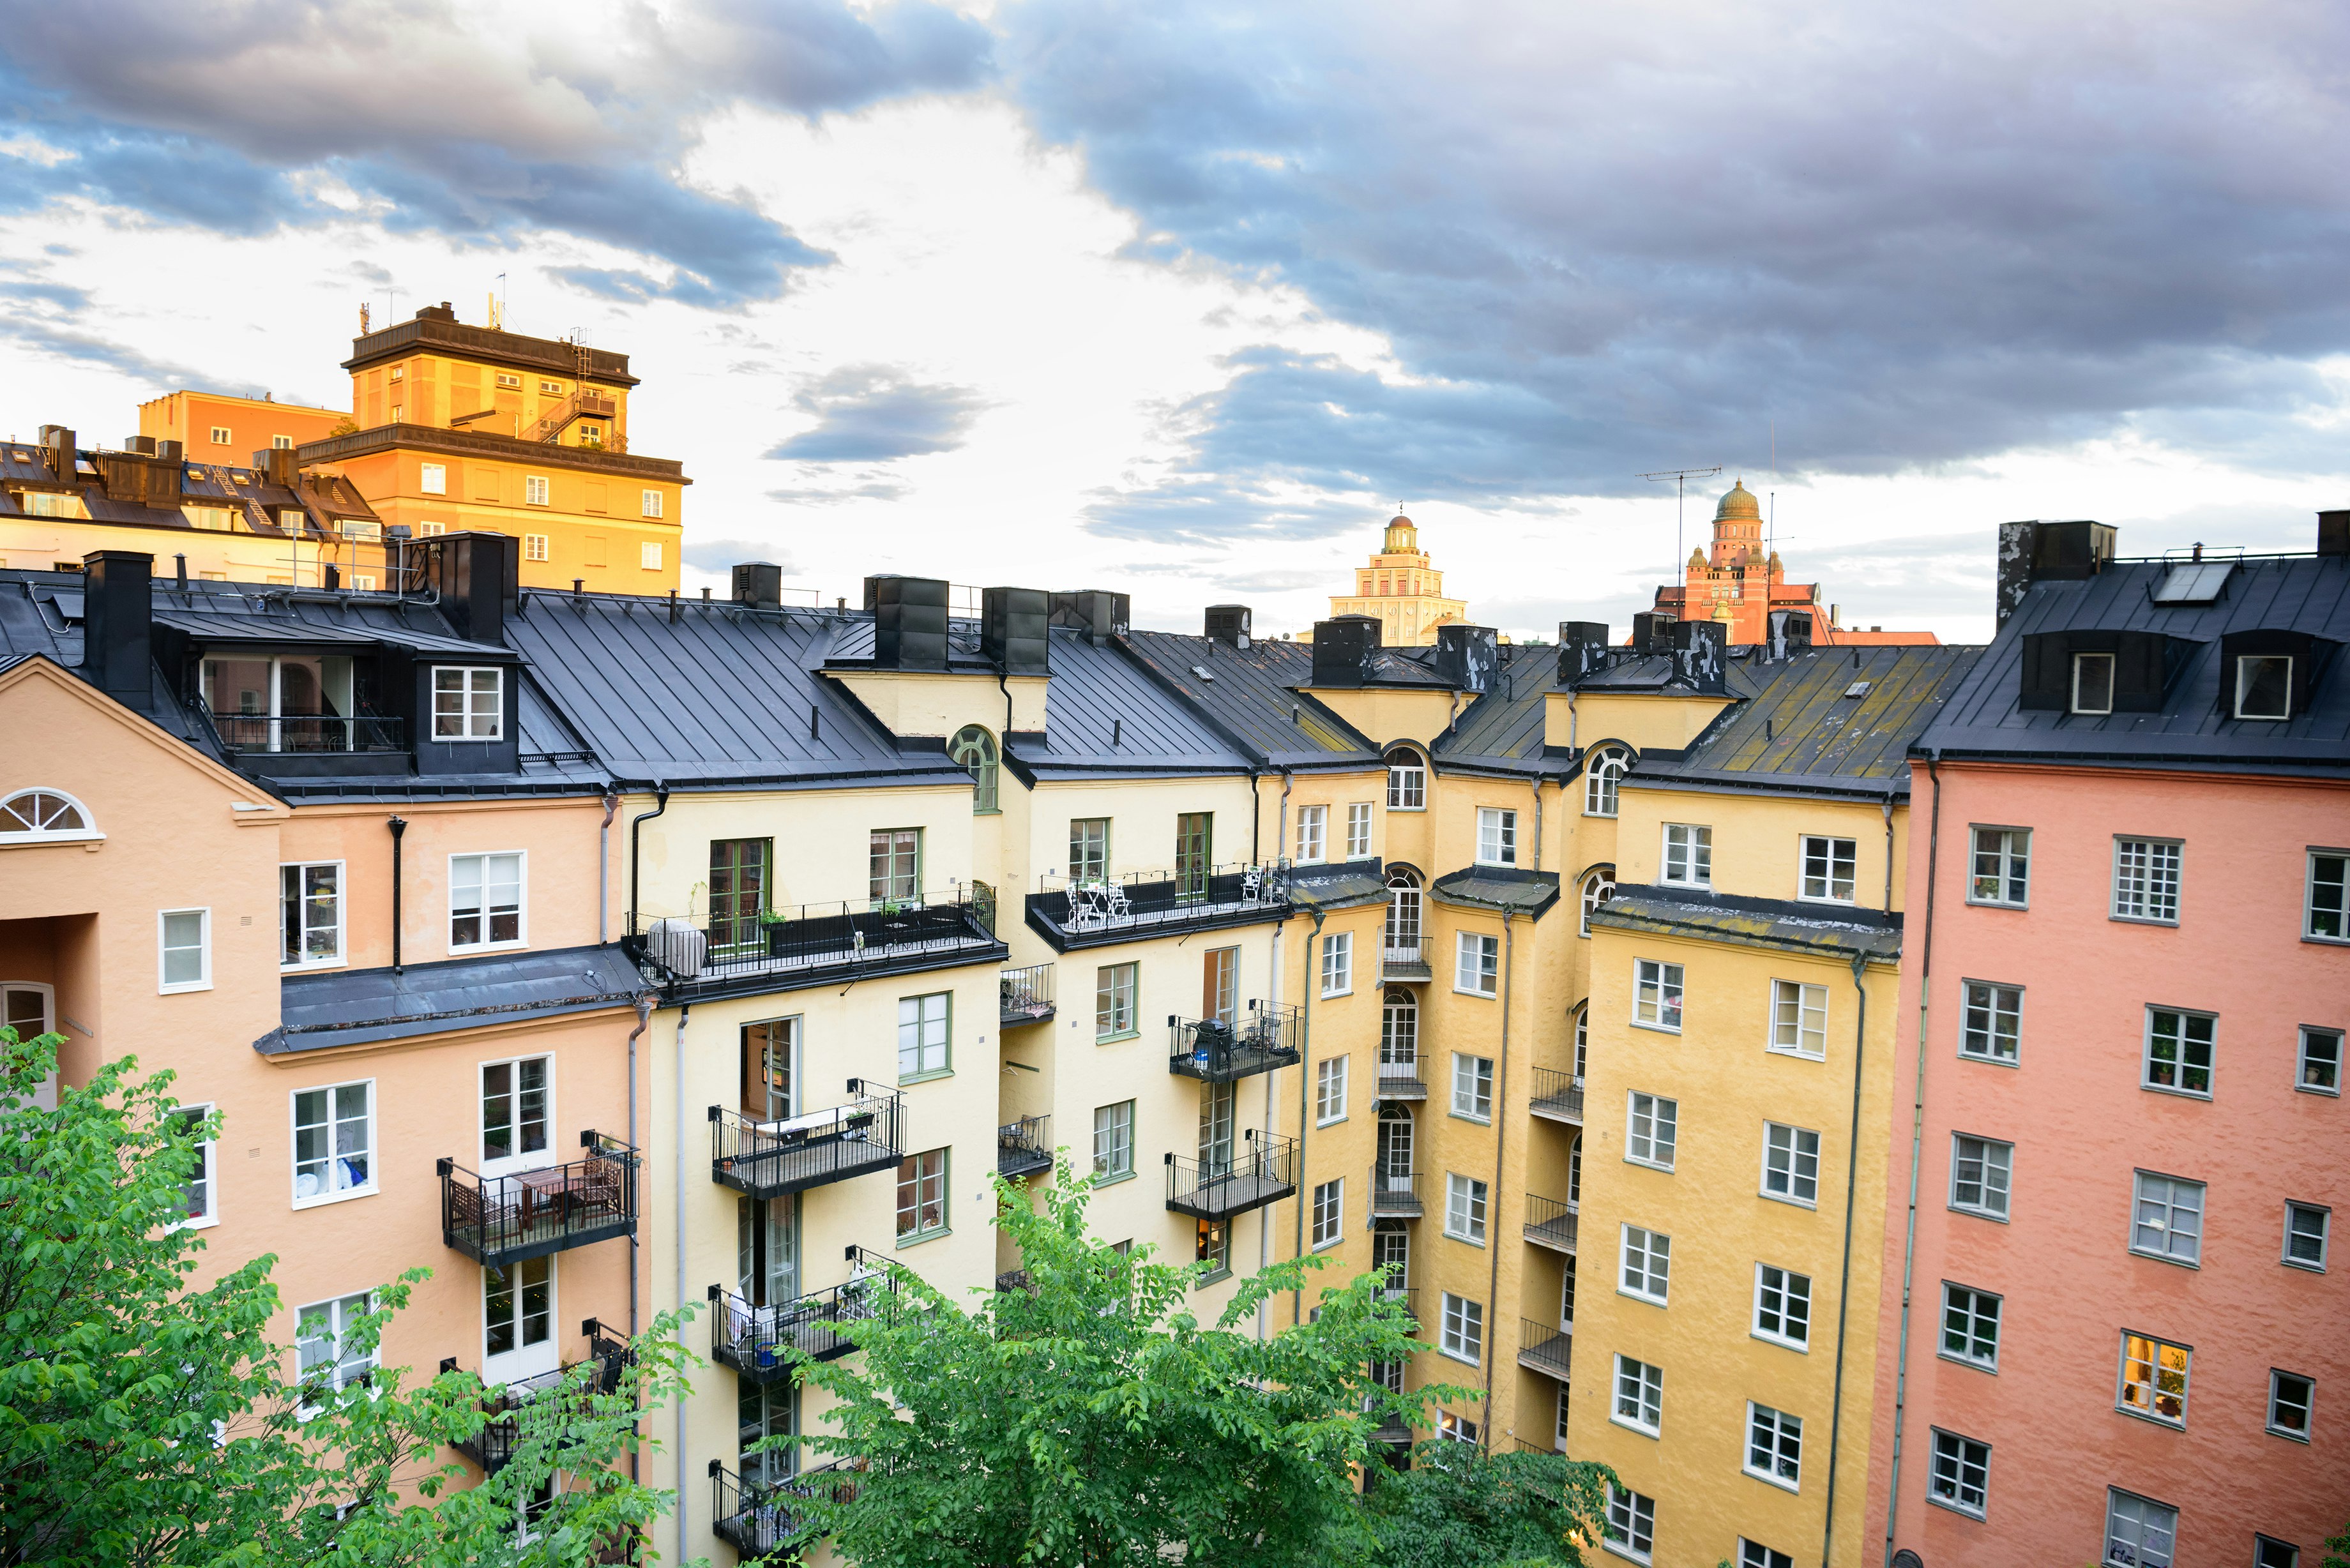 Typically beautiful and colorful apartment buildings in Vasastan, Stockholm